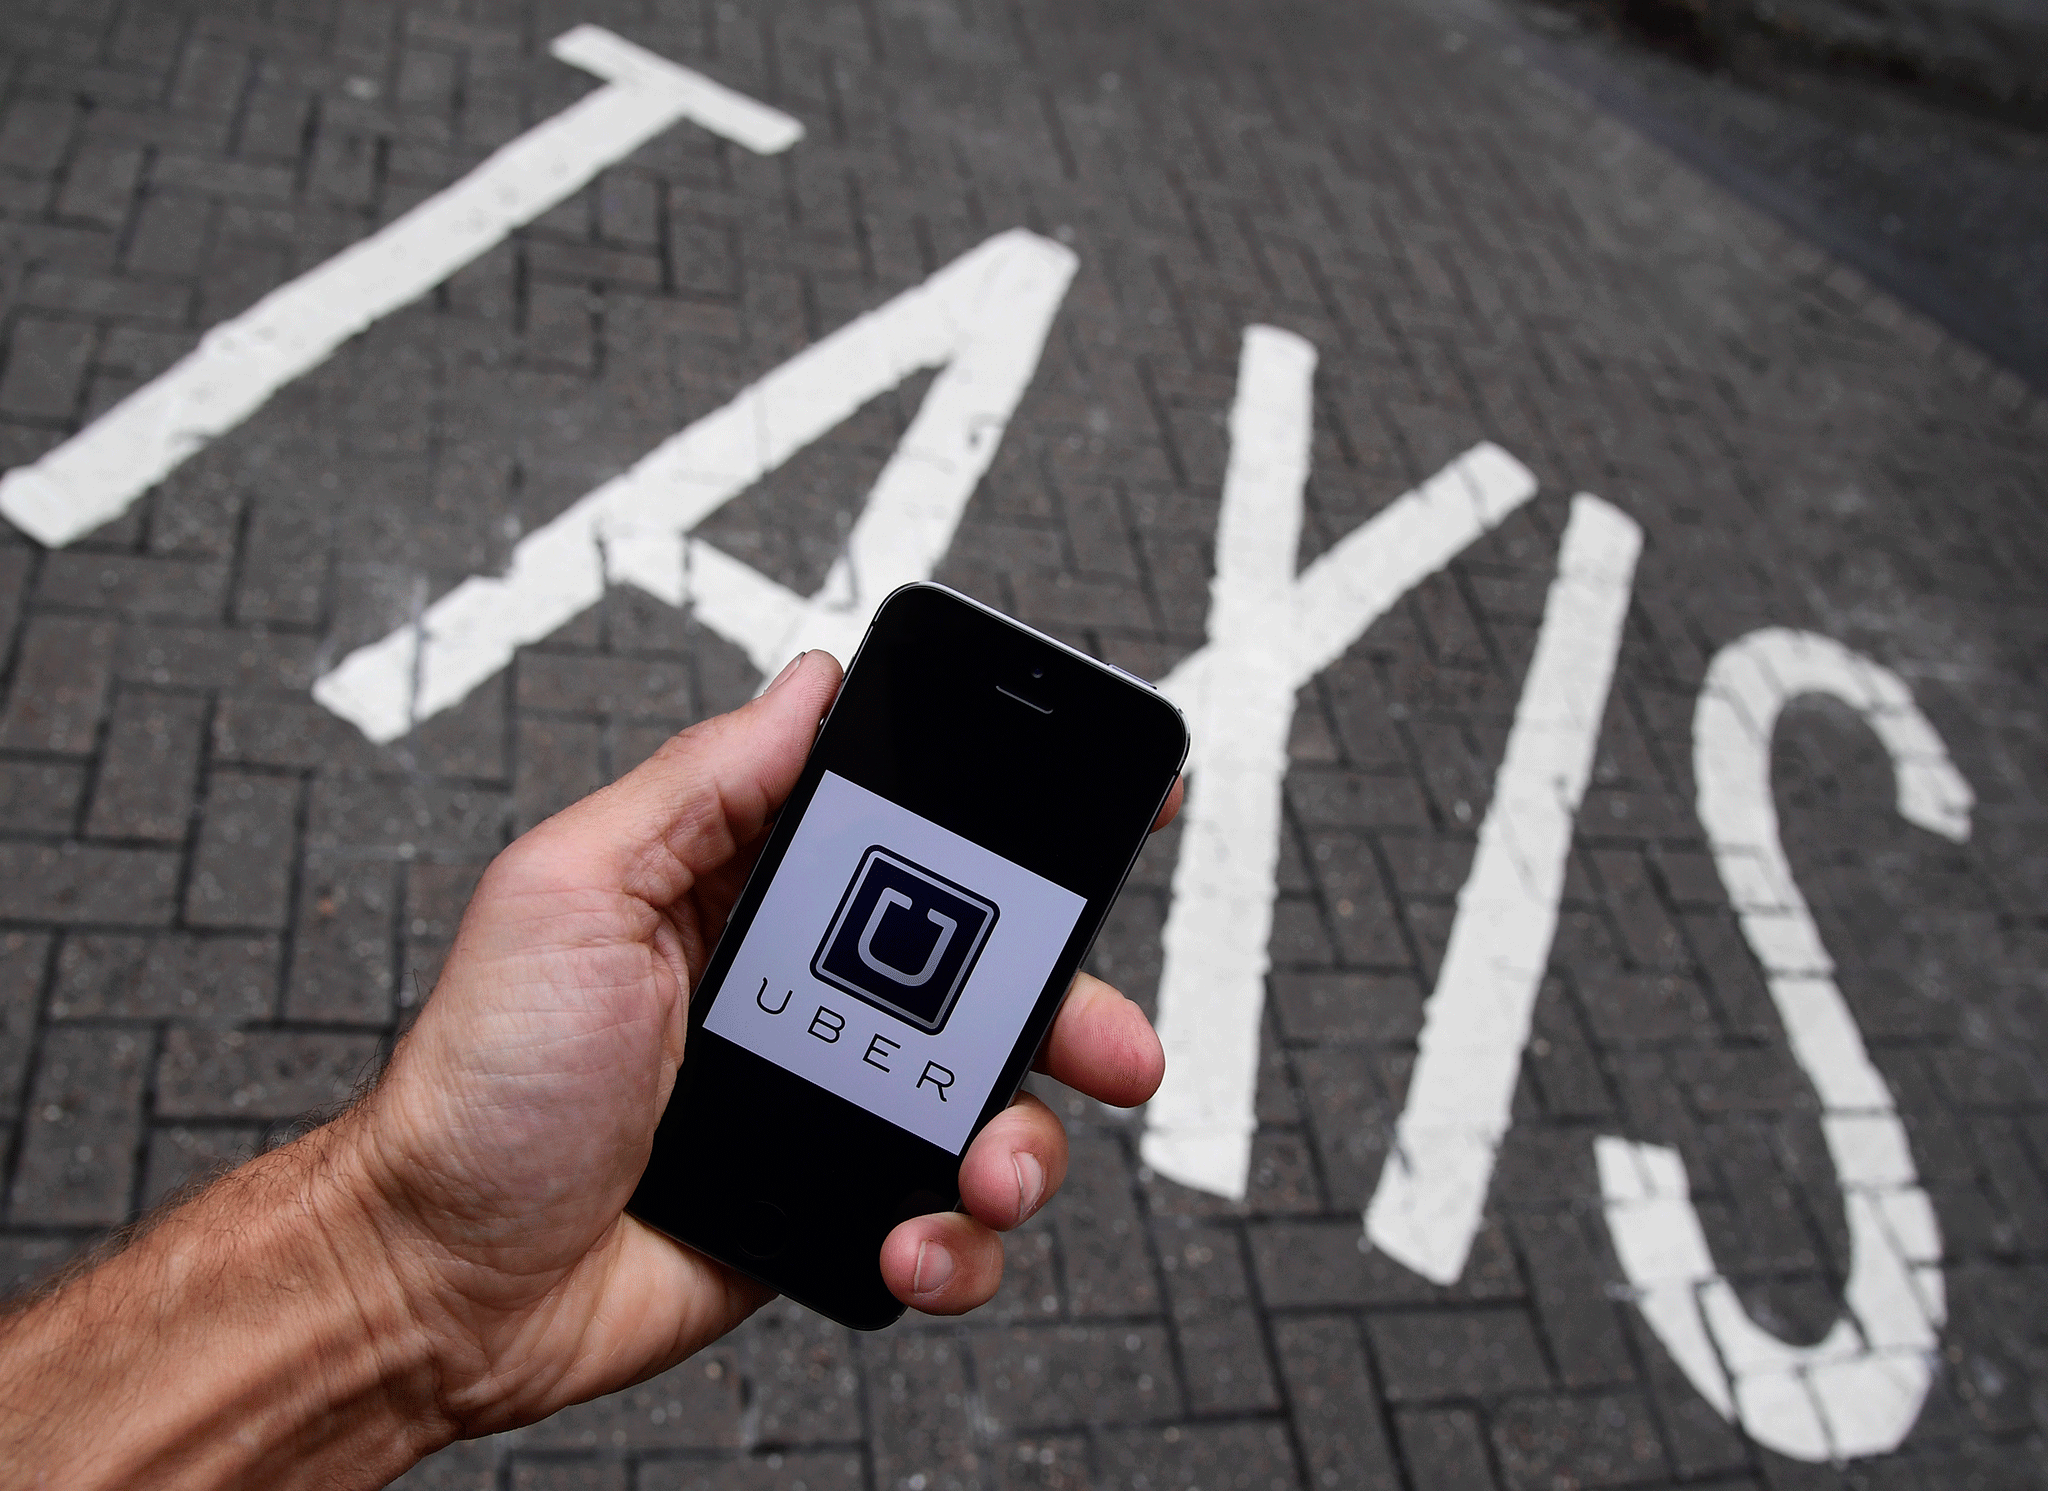 The San Francisco ride-hailing company said drivers would earn $90,000 in New York, on average